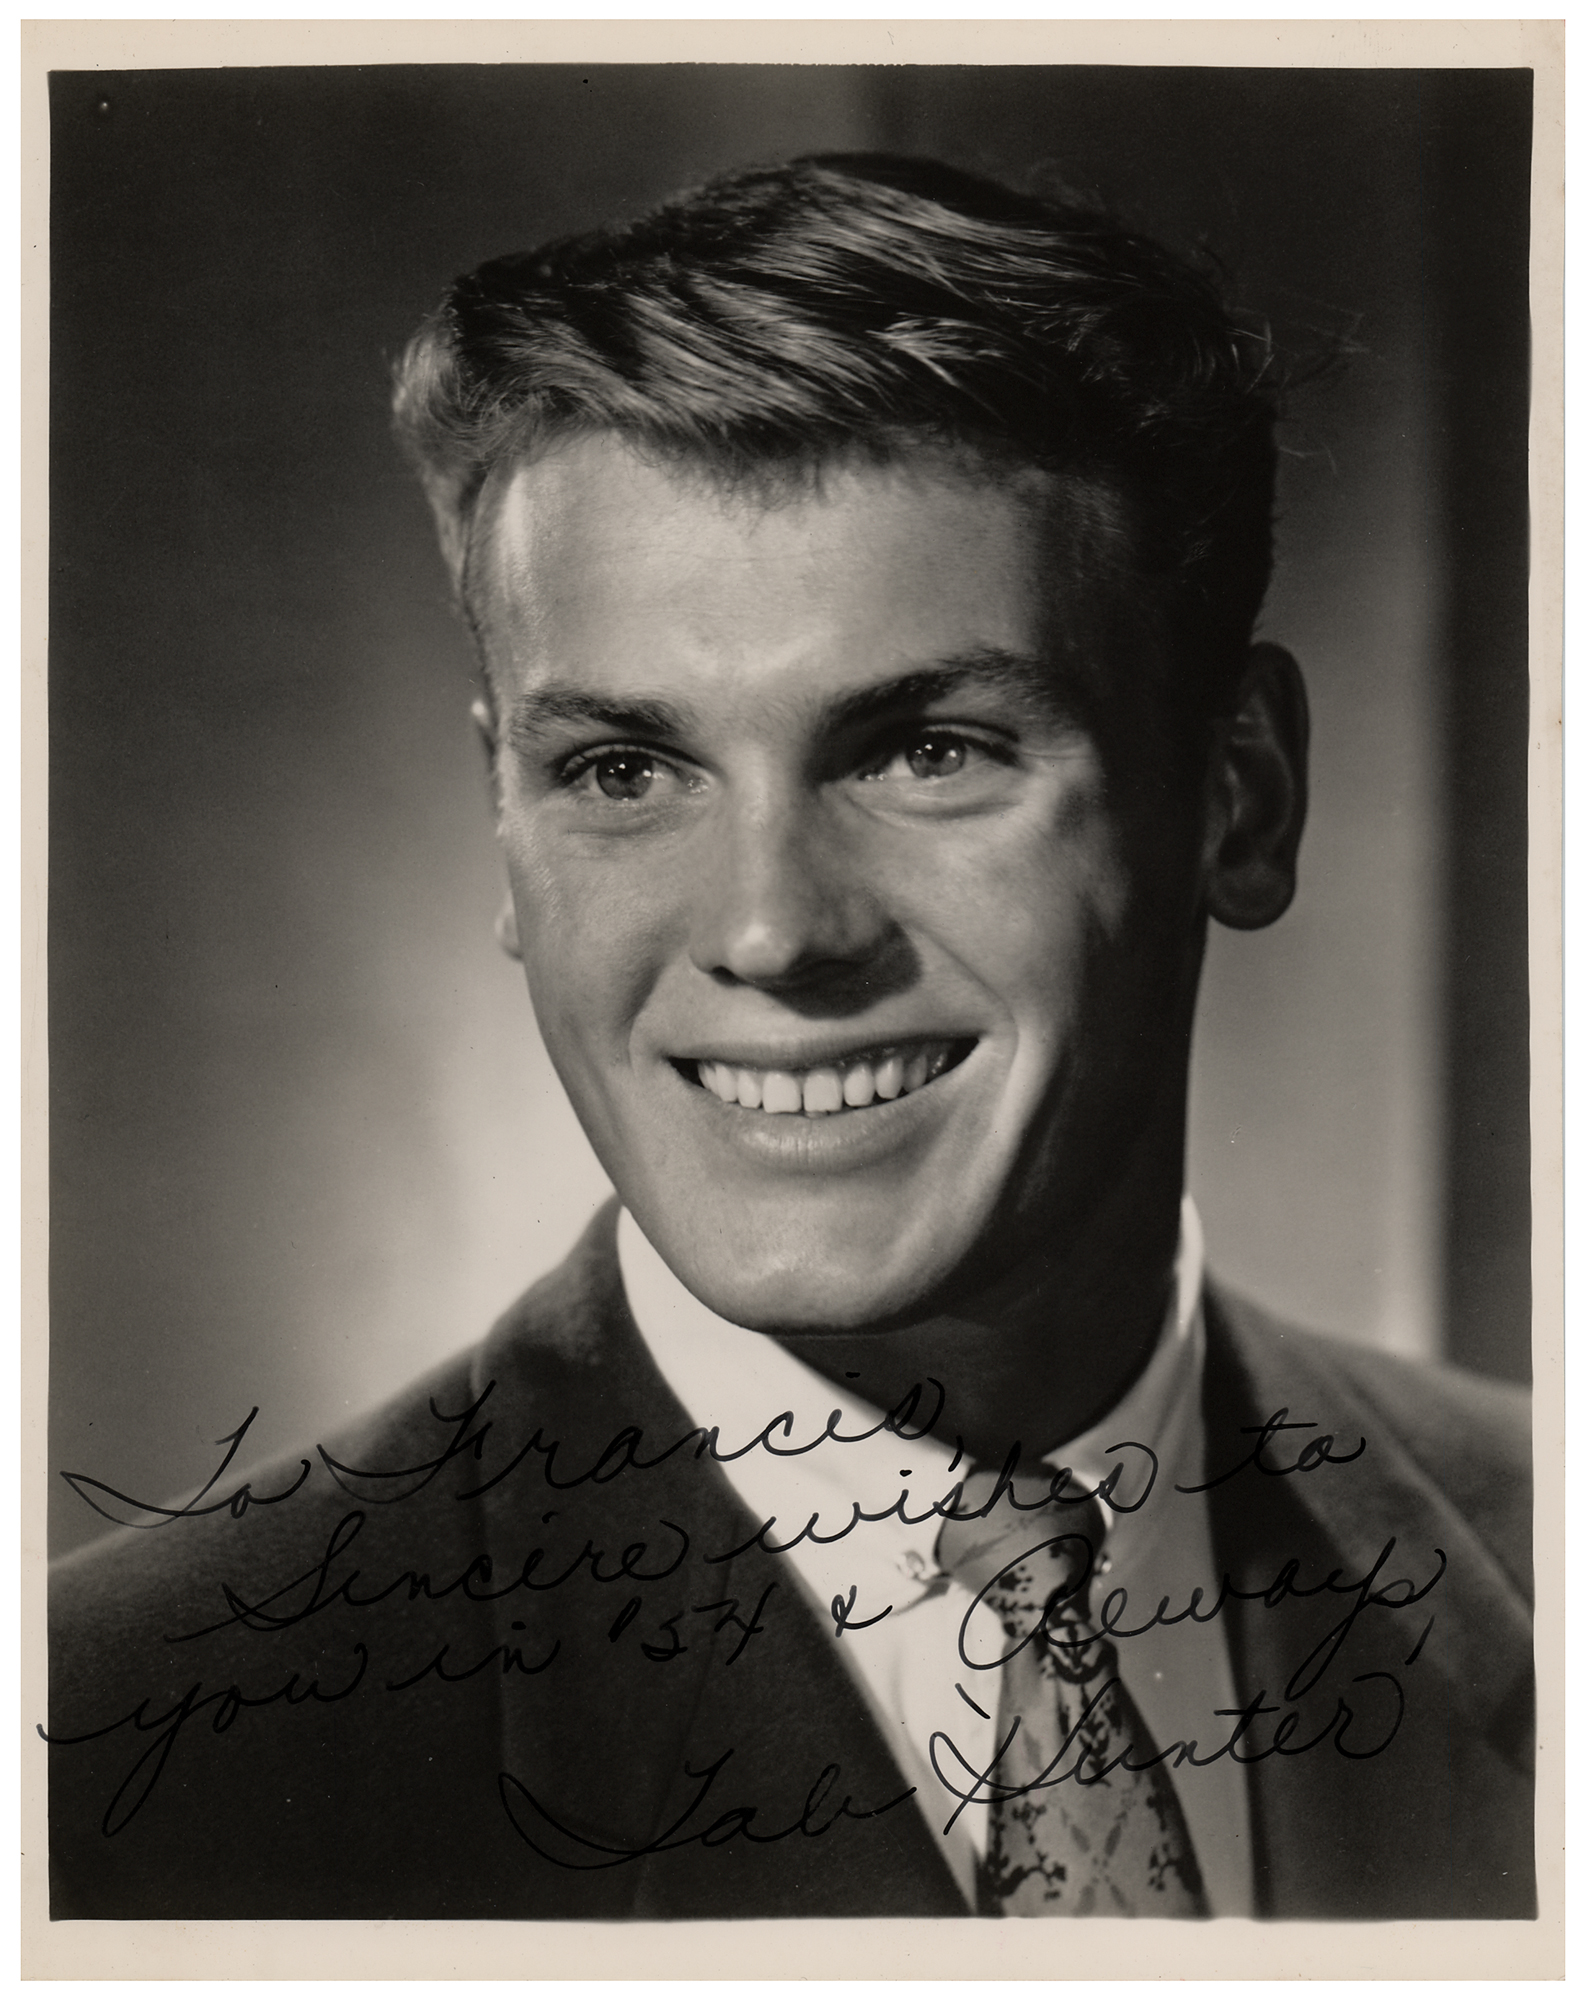 Tab Hunter Signed Photograph | Sold for $125 | RR Auction